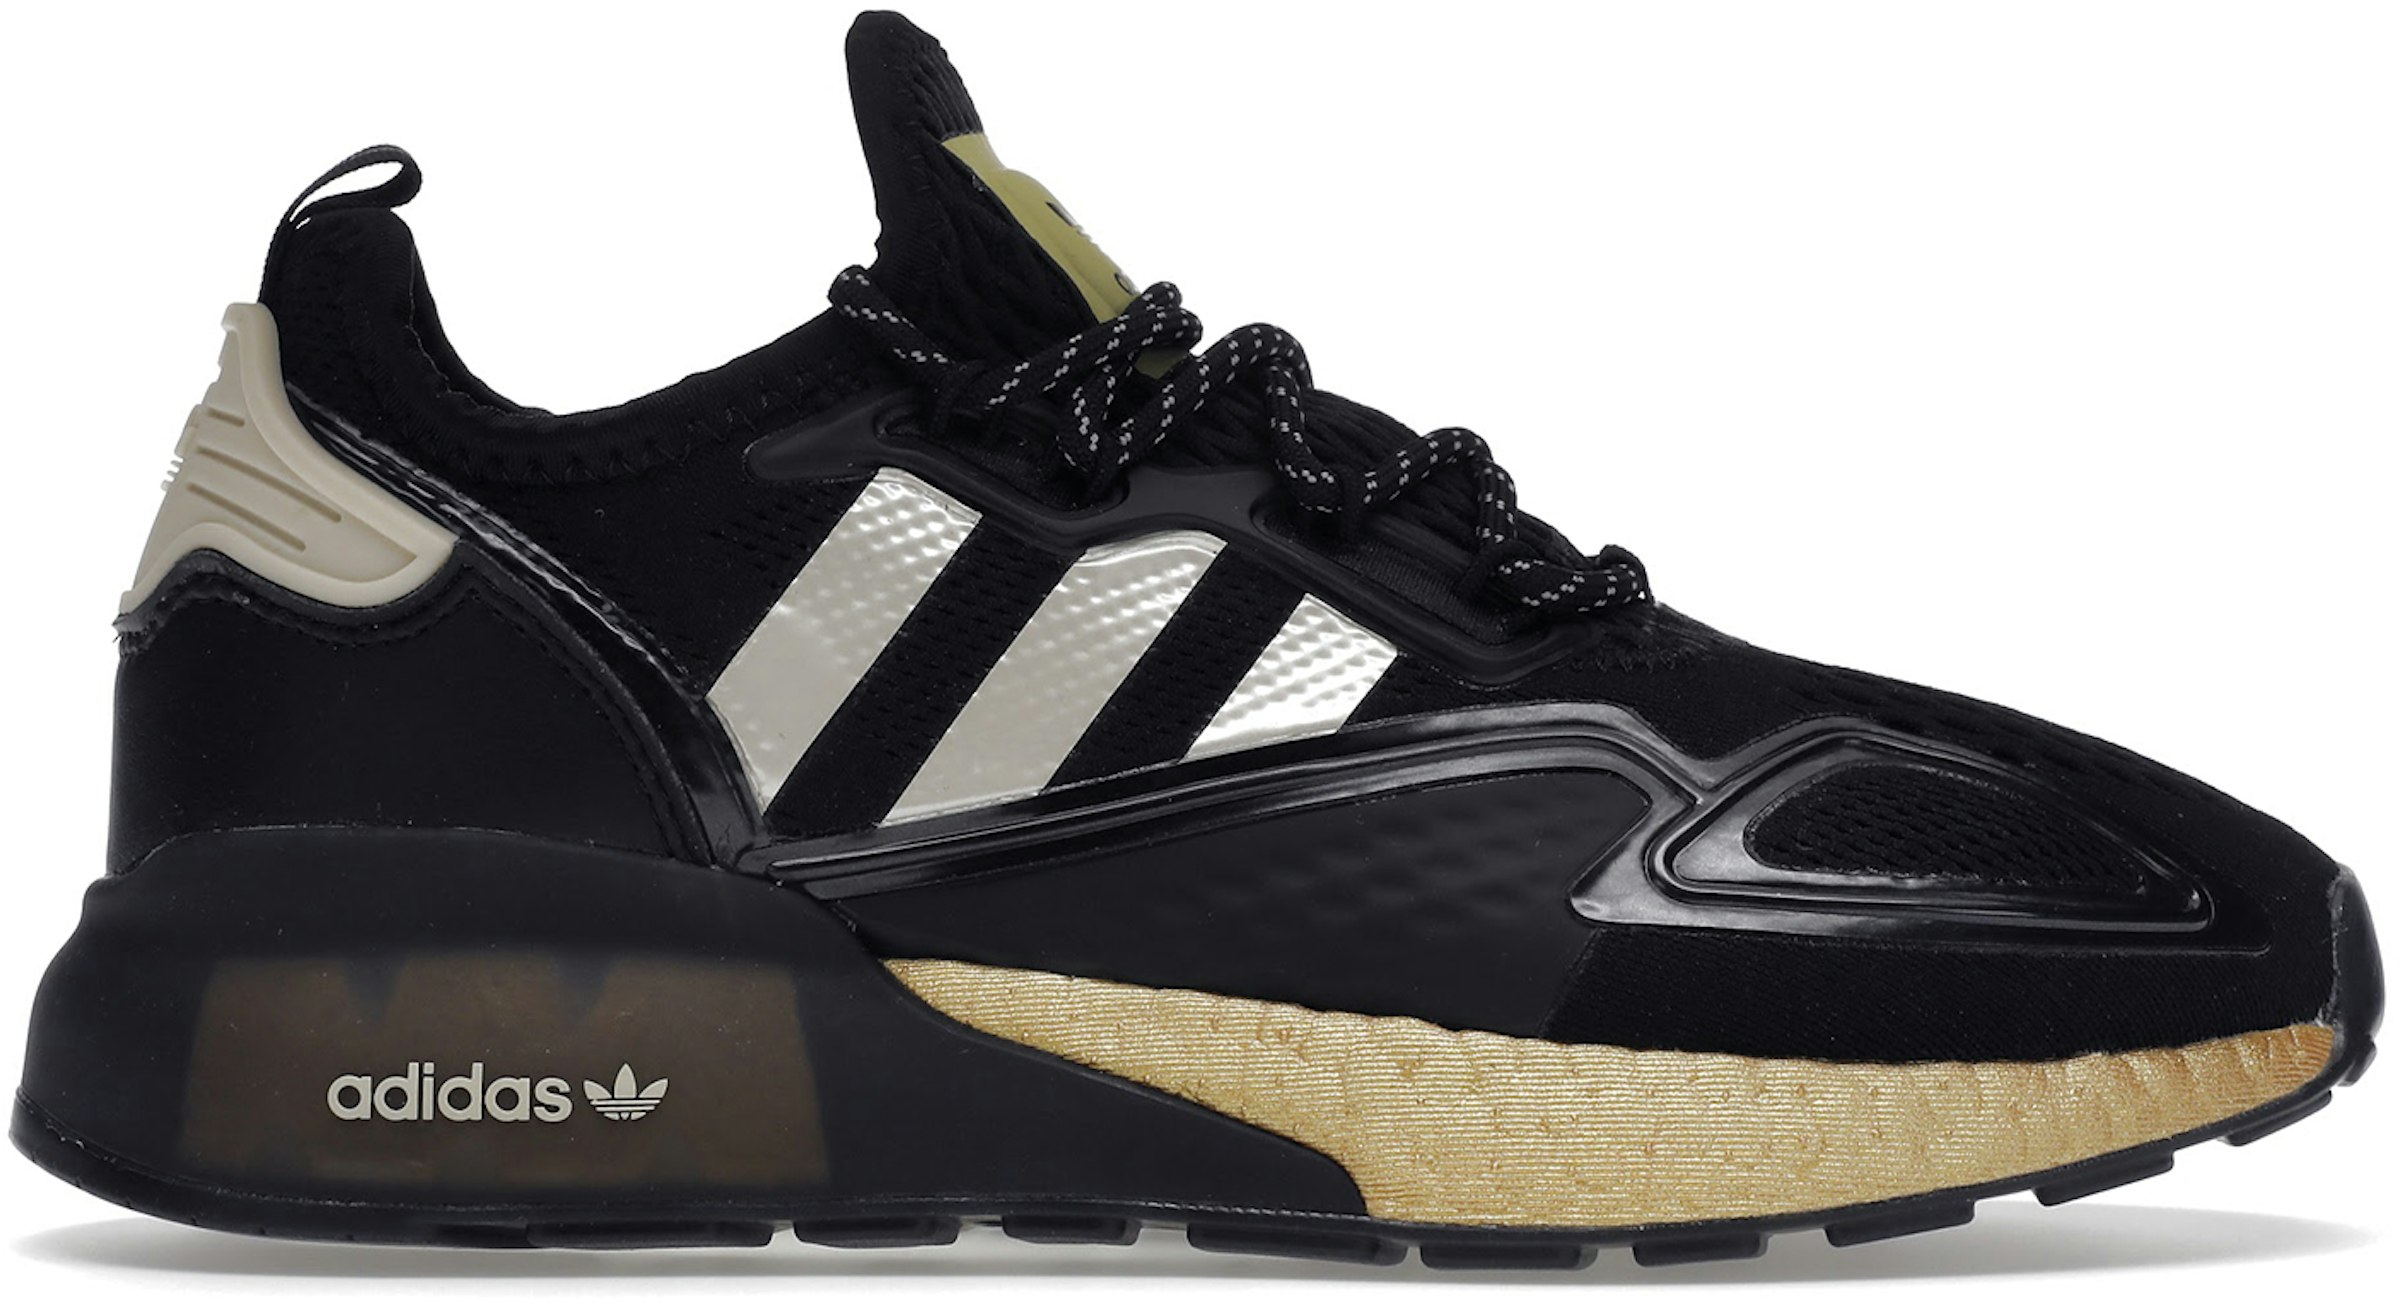 Amanecer Enlace pasaporte adidas ZX 2K Boost Black Gold Metallic (W) - FY2014 - US